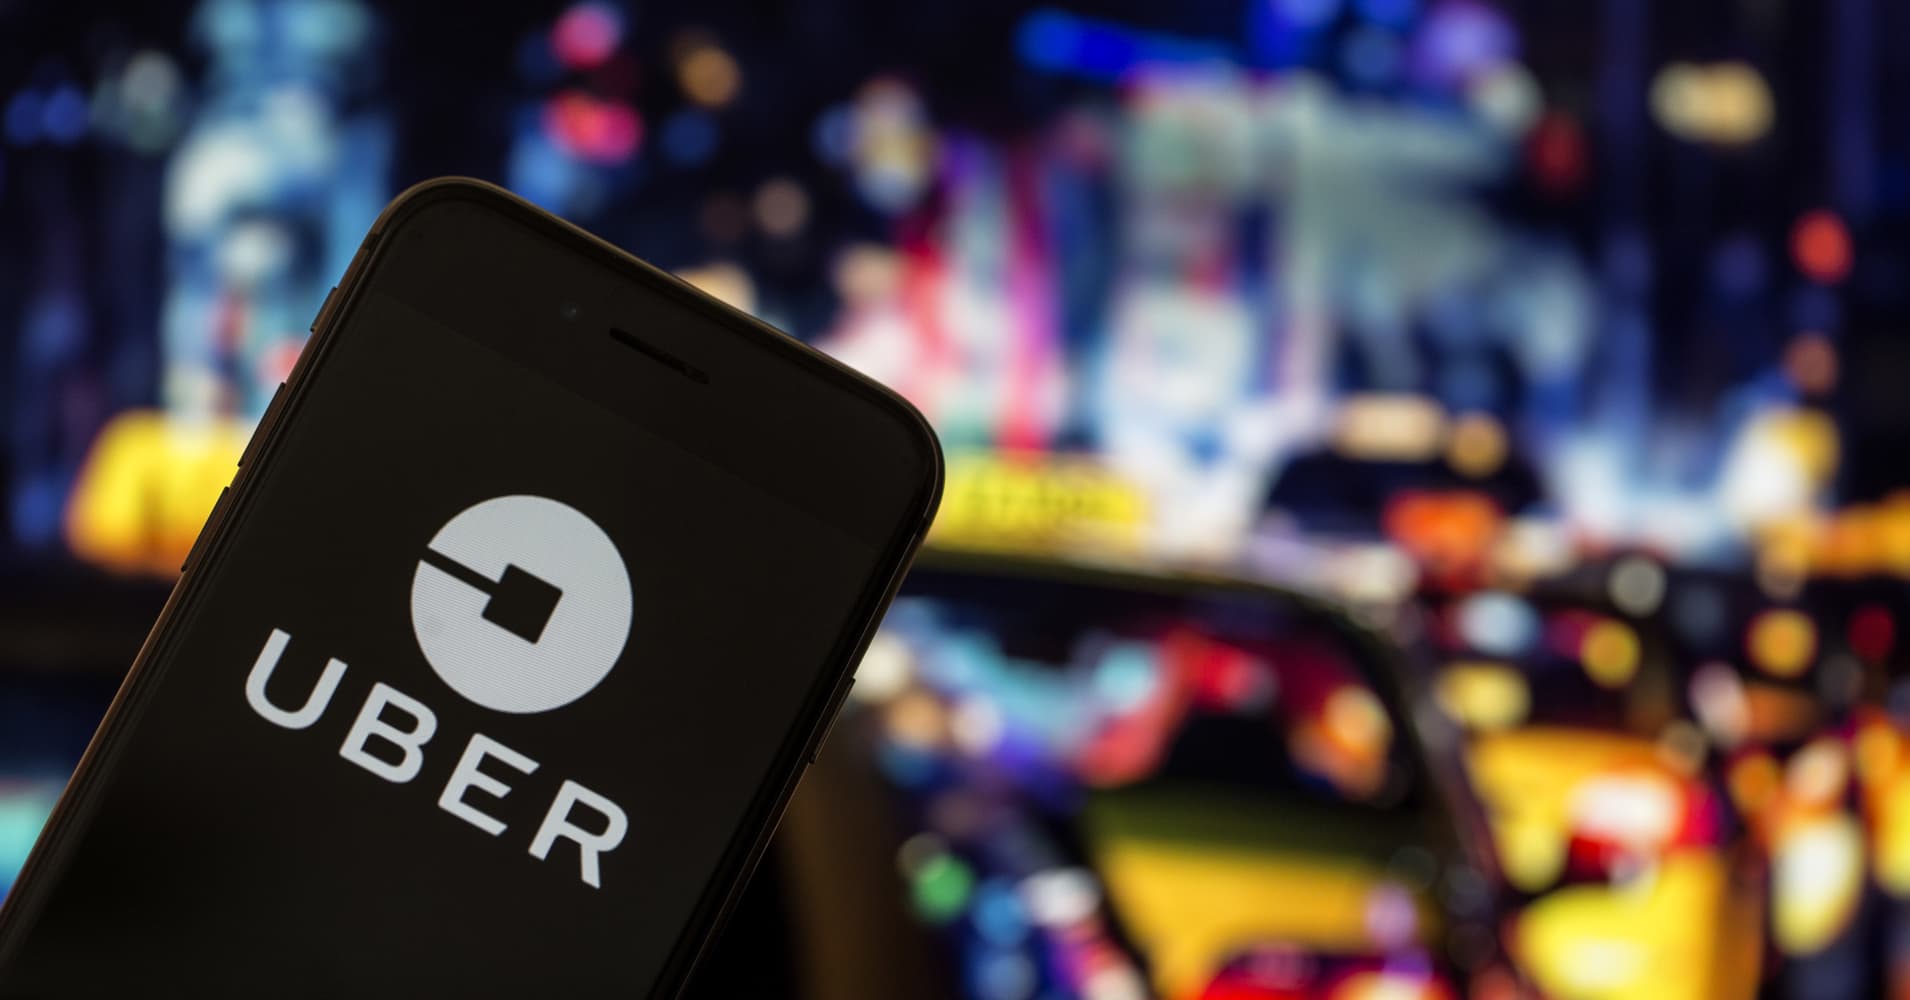 Uber files IPO paperwork, races against Lyft for big offering